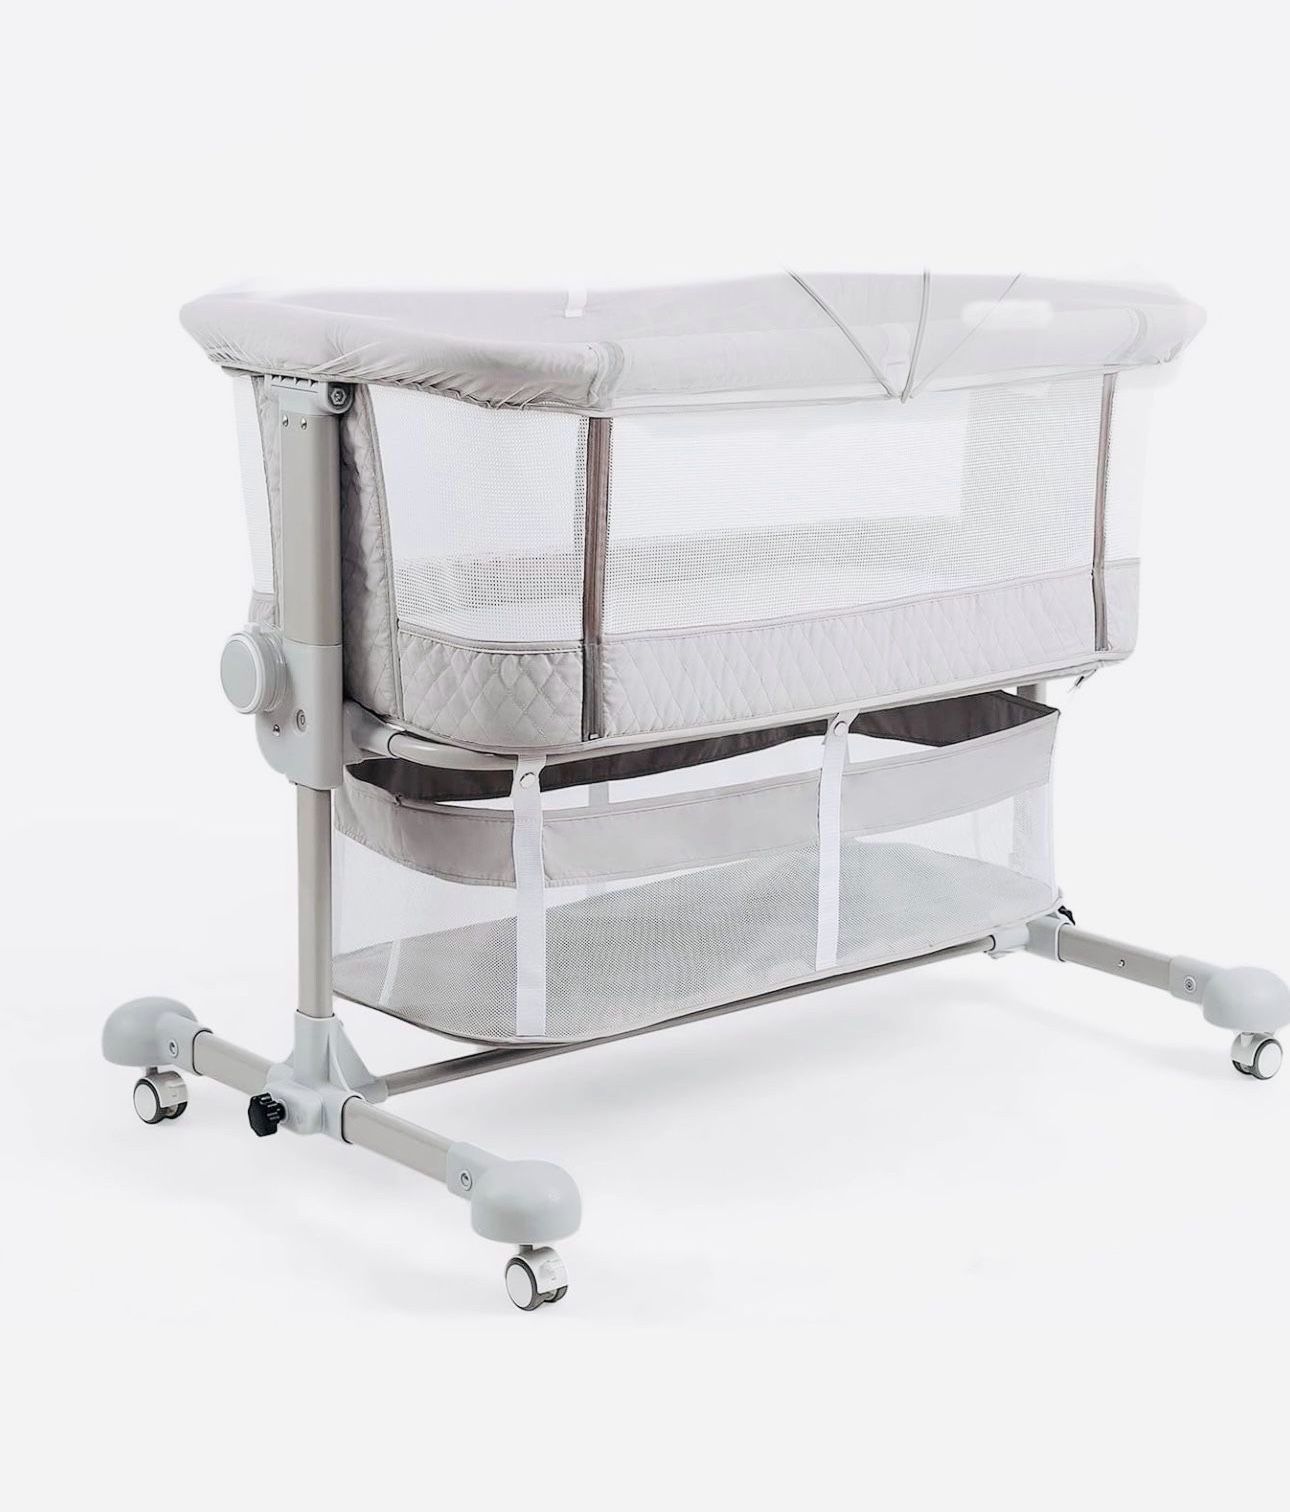 Maydolly Baby Bassinets Bedside Sleeper, Bedside Crib 3 in 1 Adjustable Travel Baby Bed with Breathable Net and Mattress, Easy Folding Portable Bassin